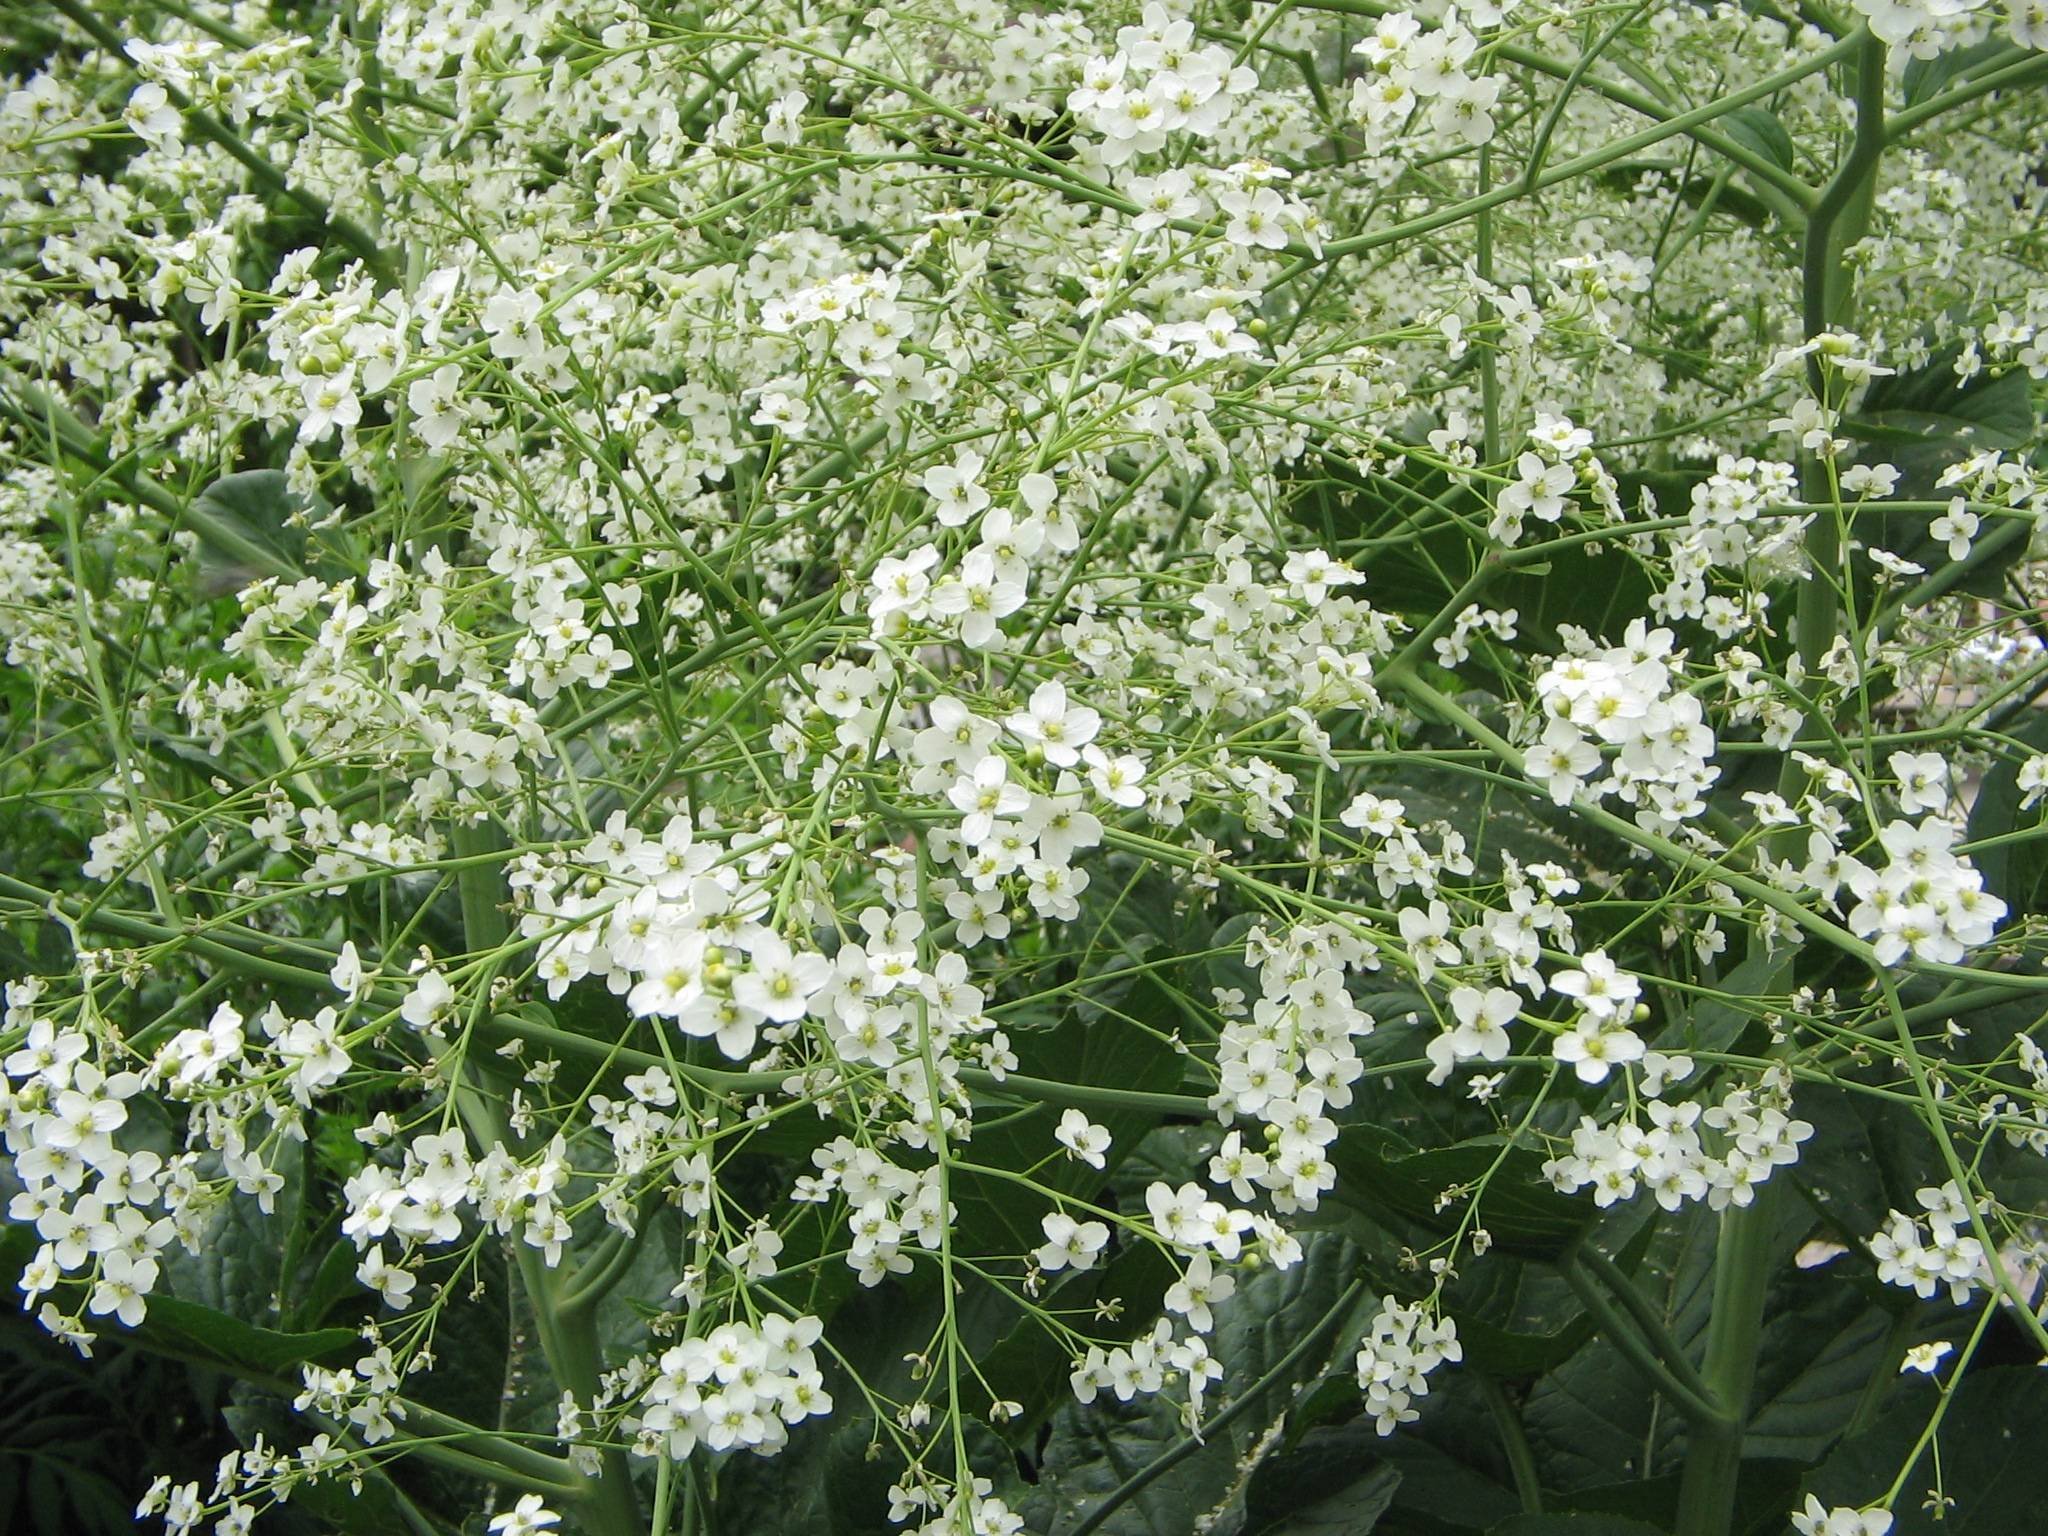 white flowers with pale-green center on light-green petioles and stems
